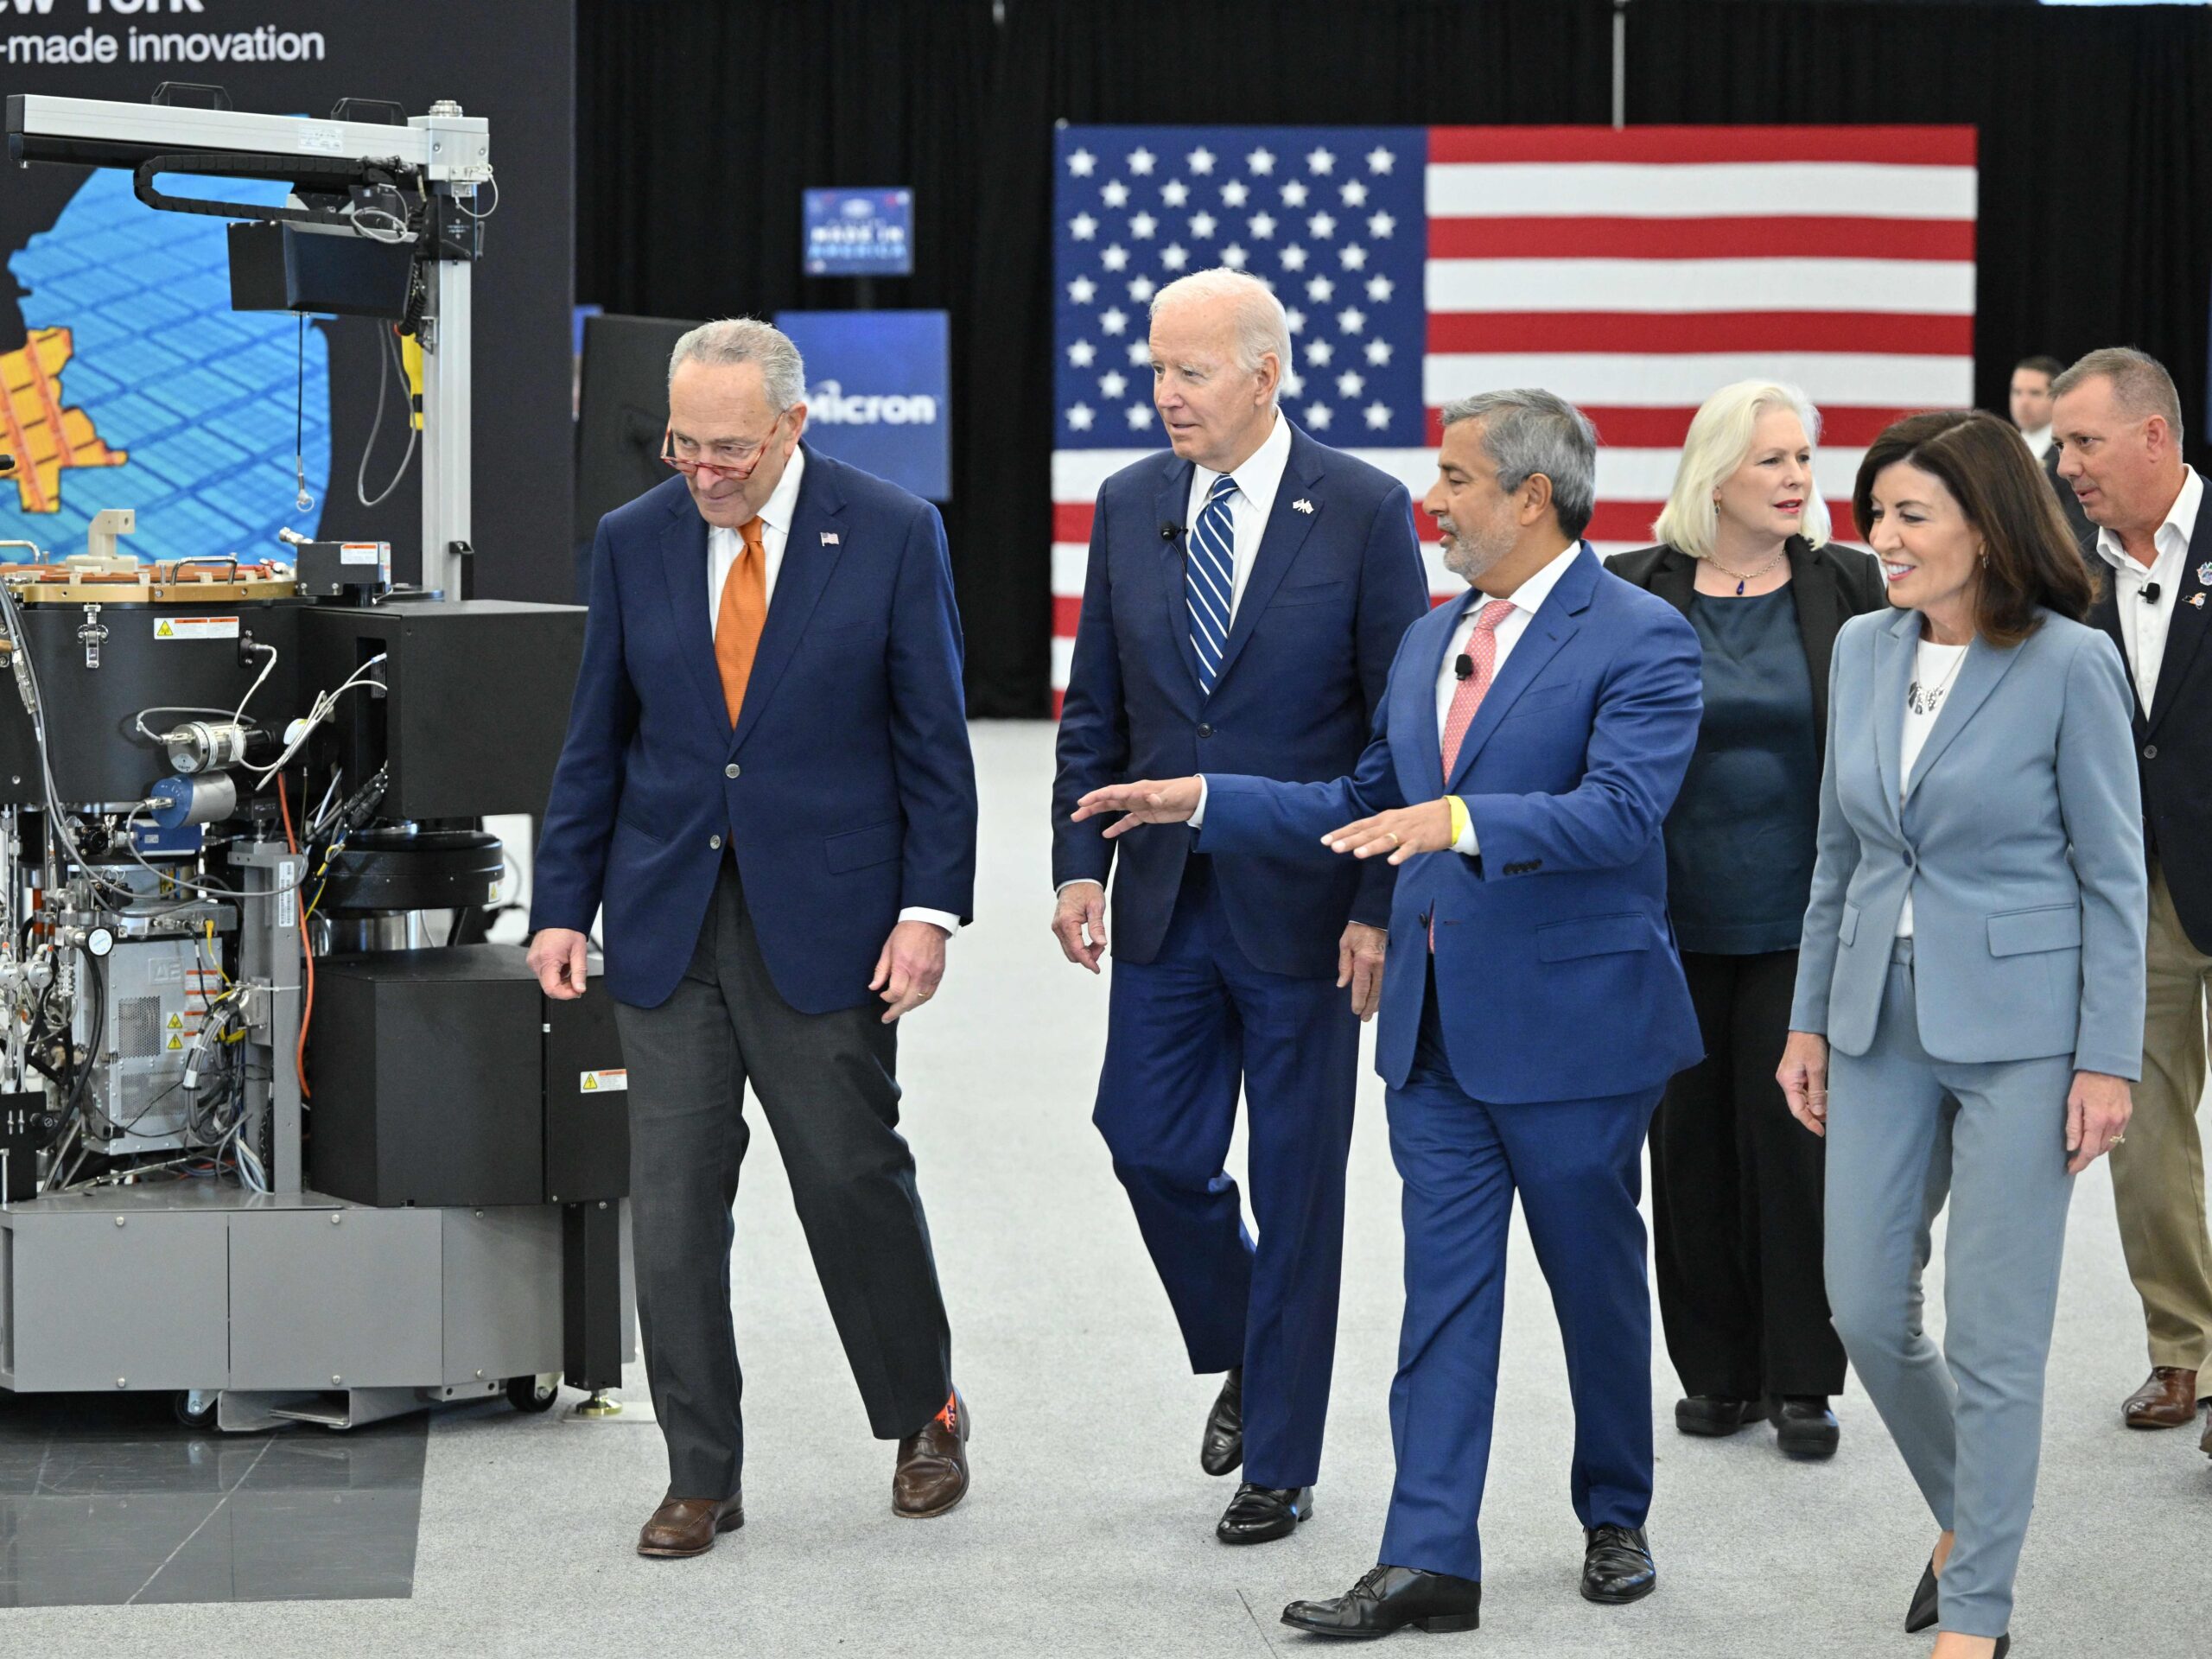 Biden is giving $6 billion to Micron for a semiconductor project in upstate New York